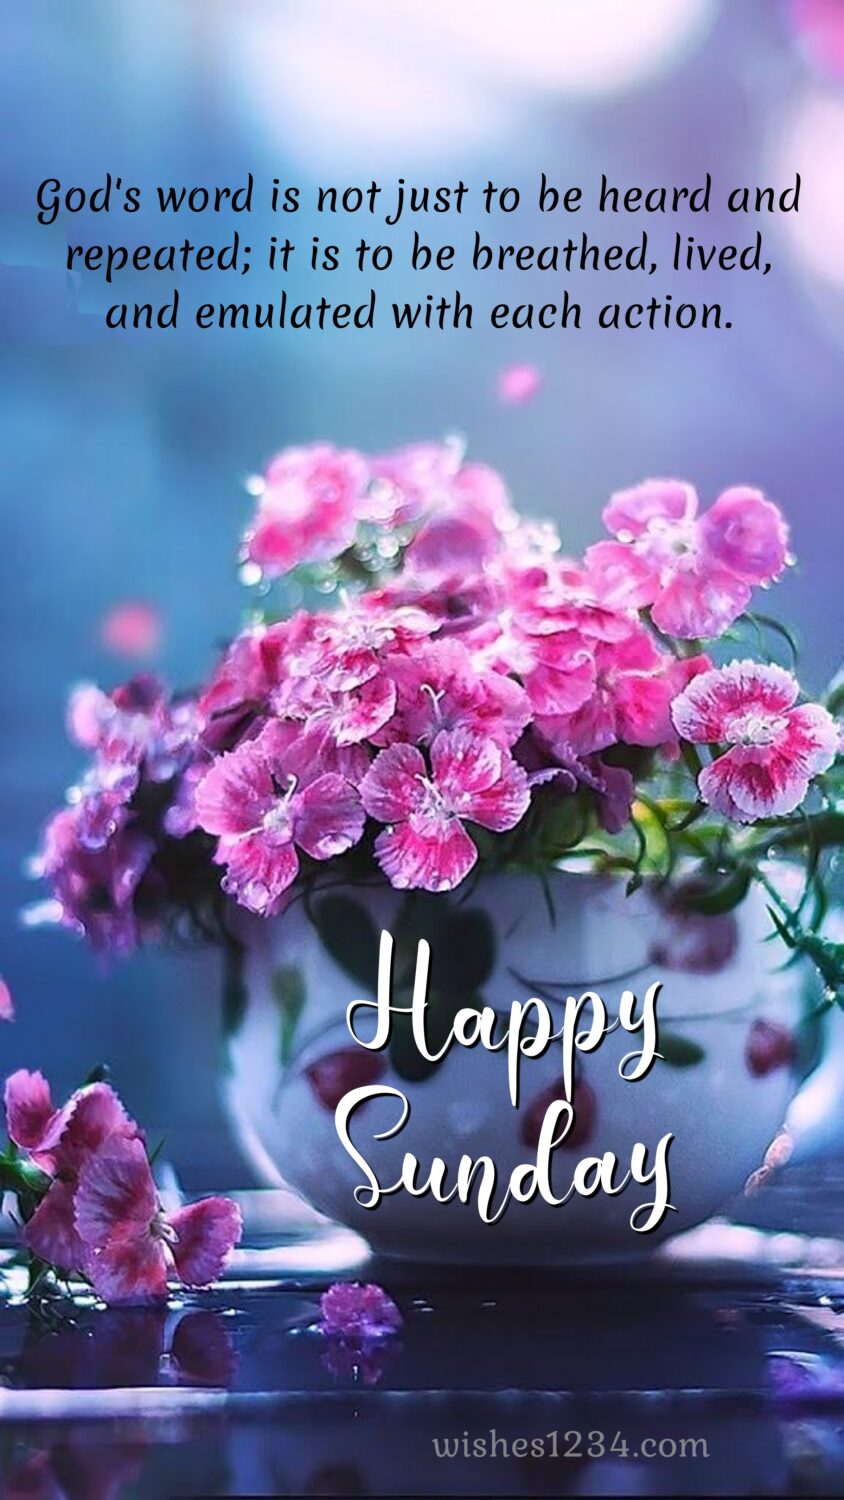 White vase with colourful flowers, Happy Sunday Blessings Quotes Images Pictures wishes.